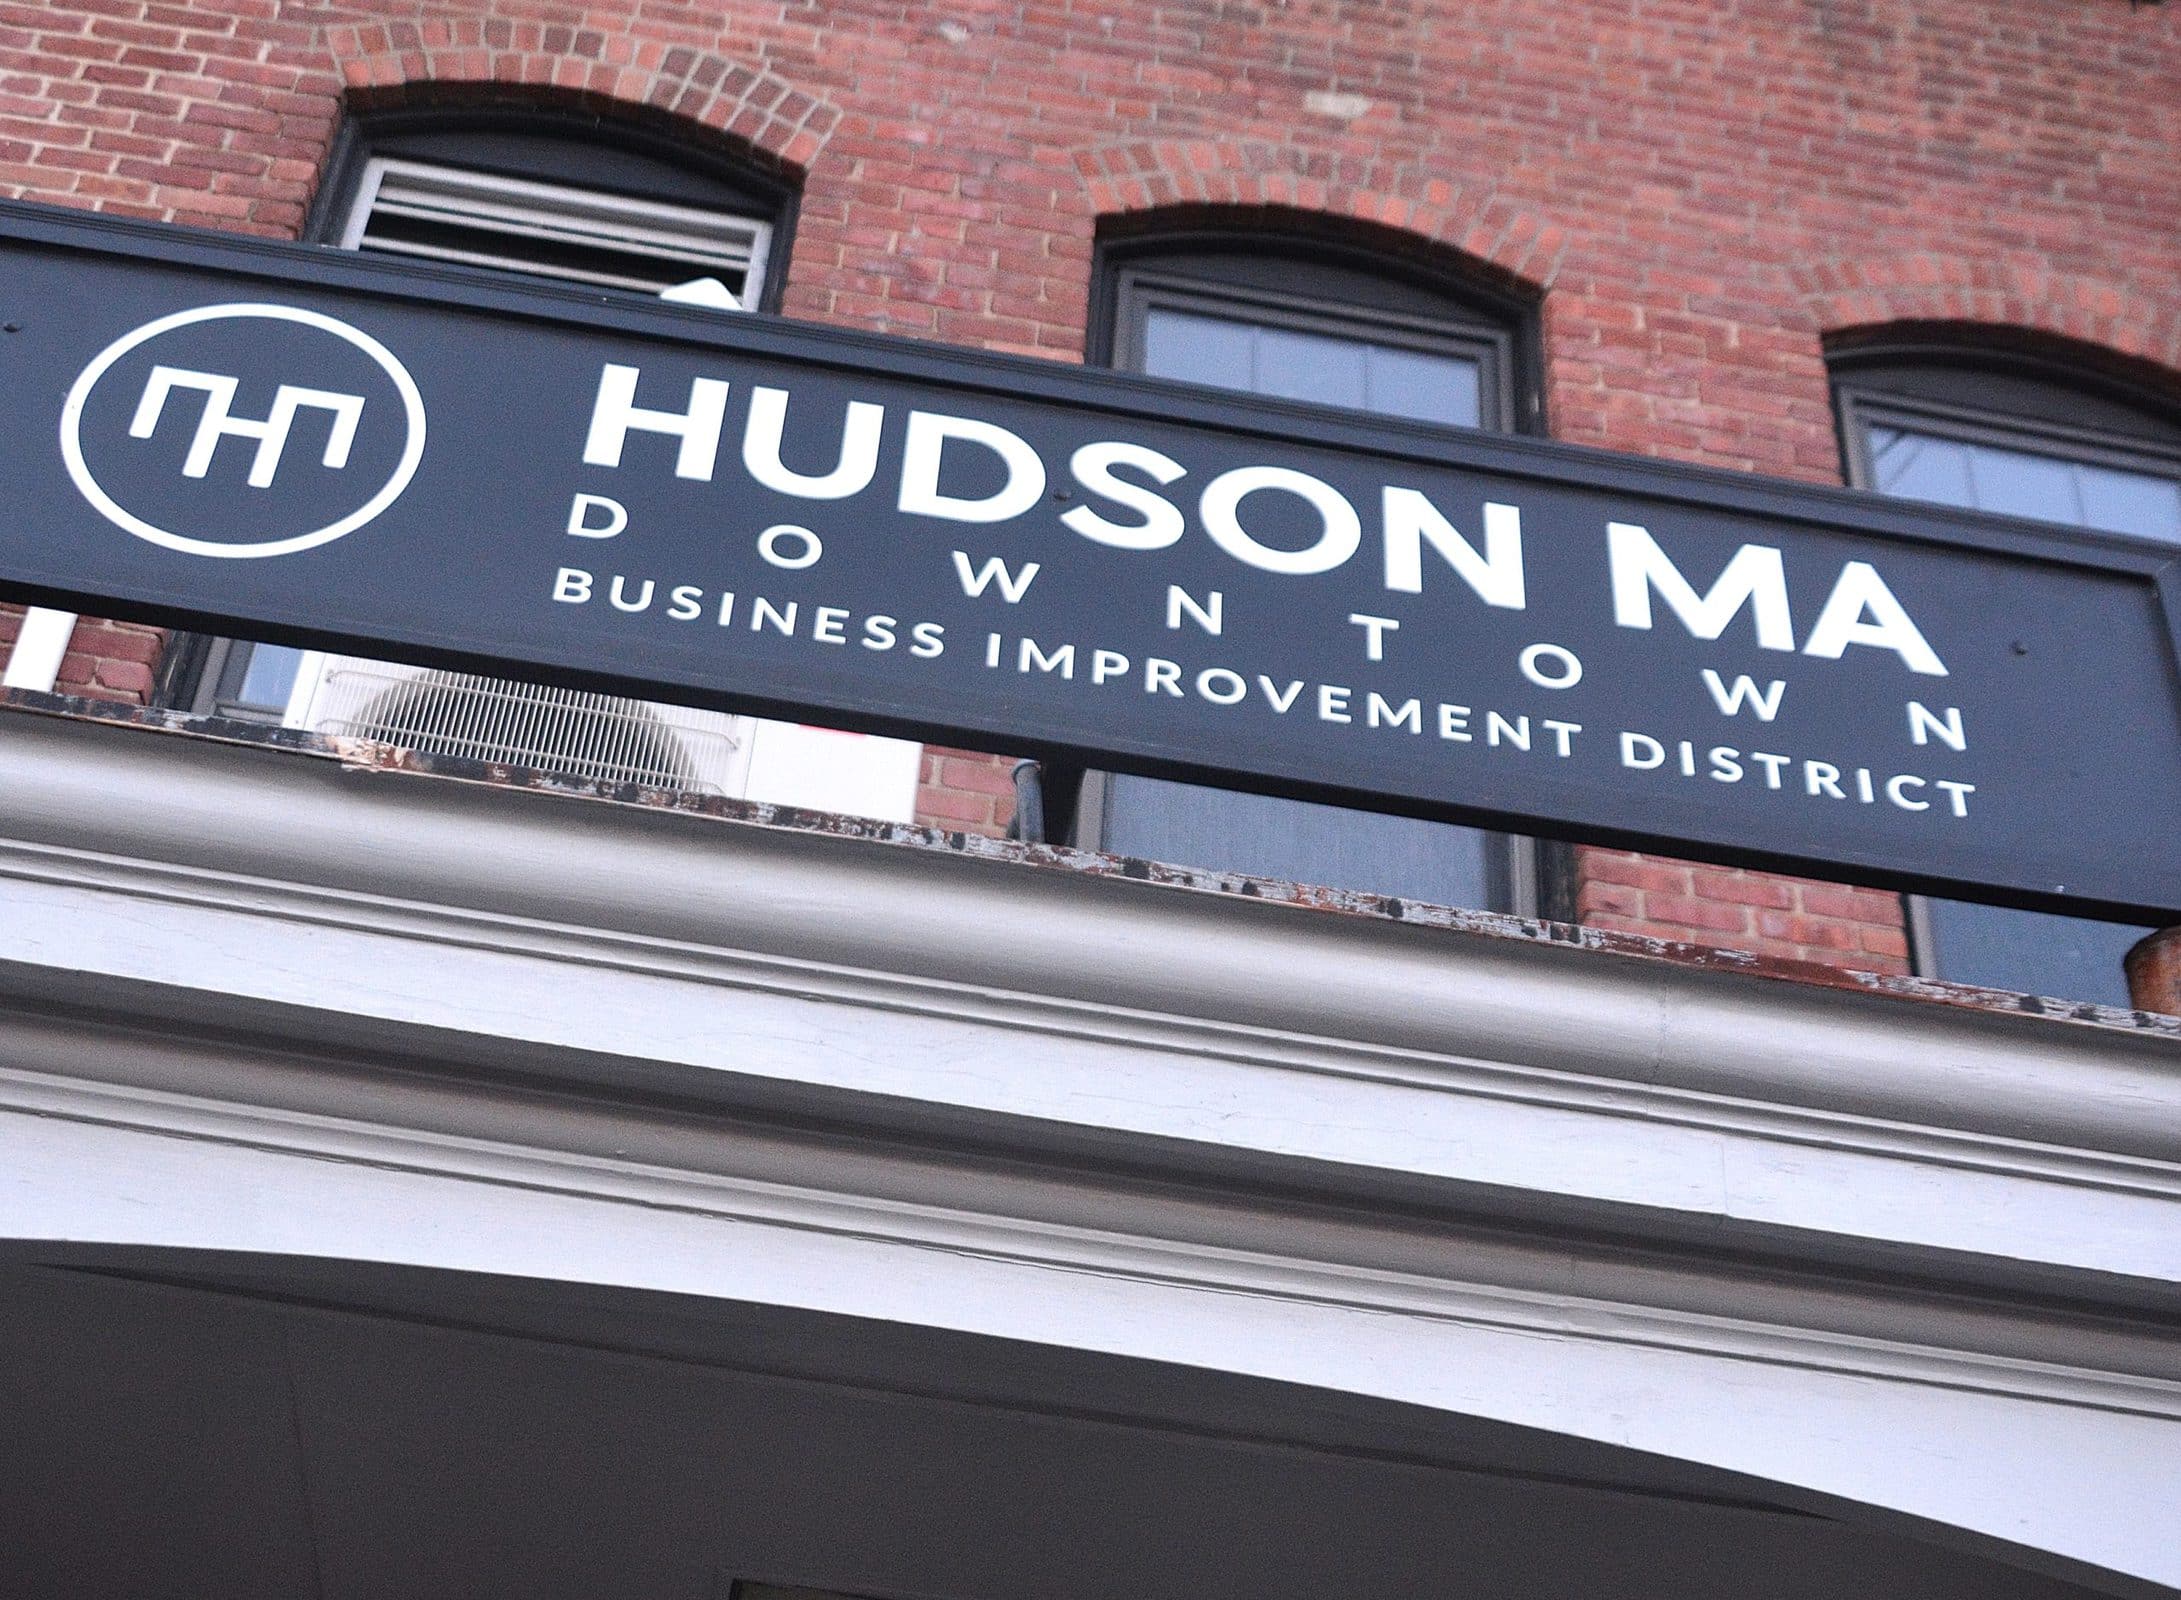 Marking 35 years of creating signage for downtown Hudson